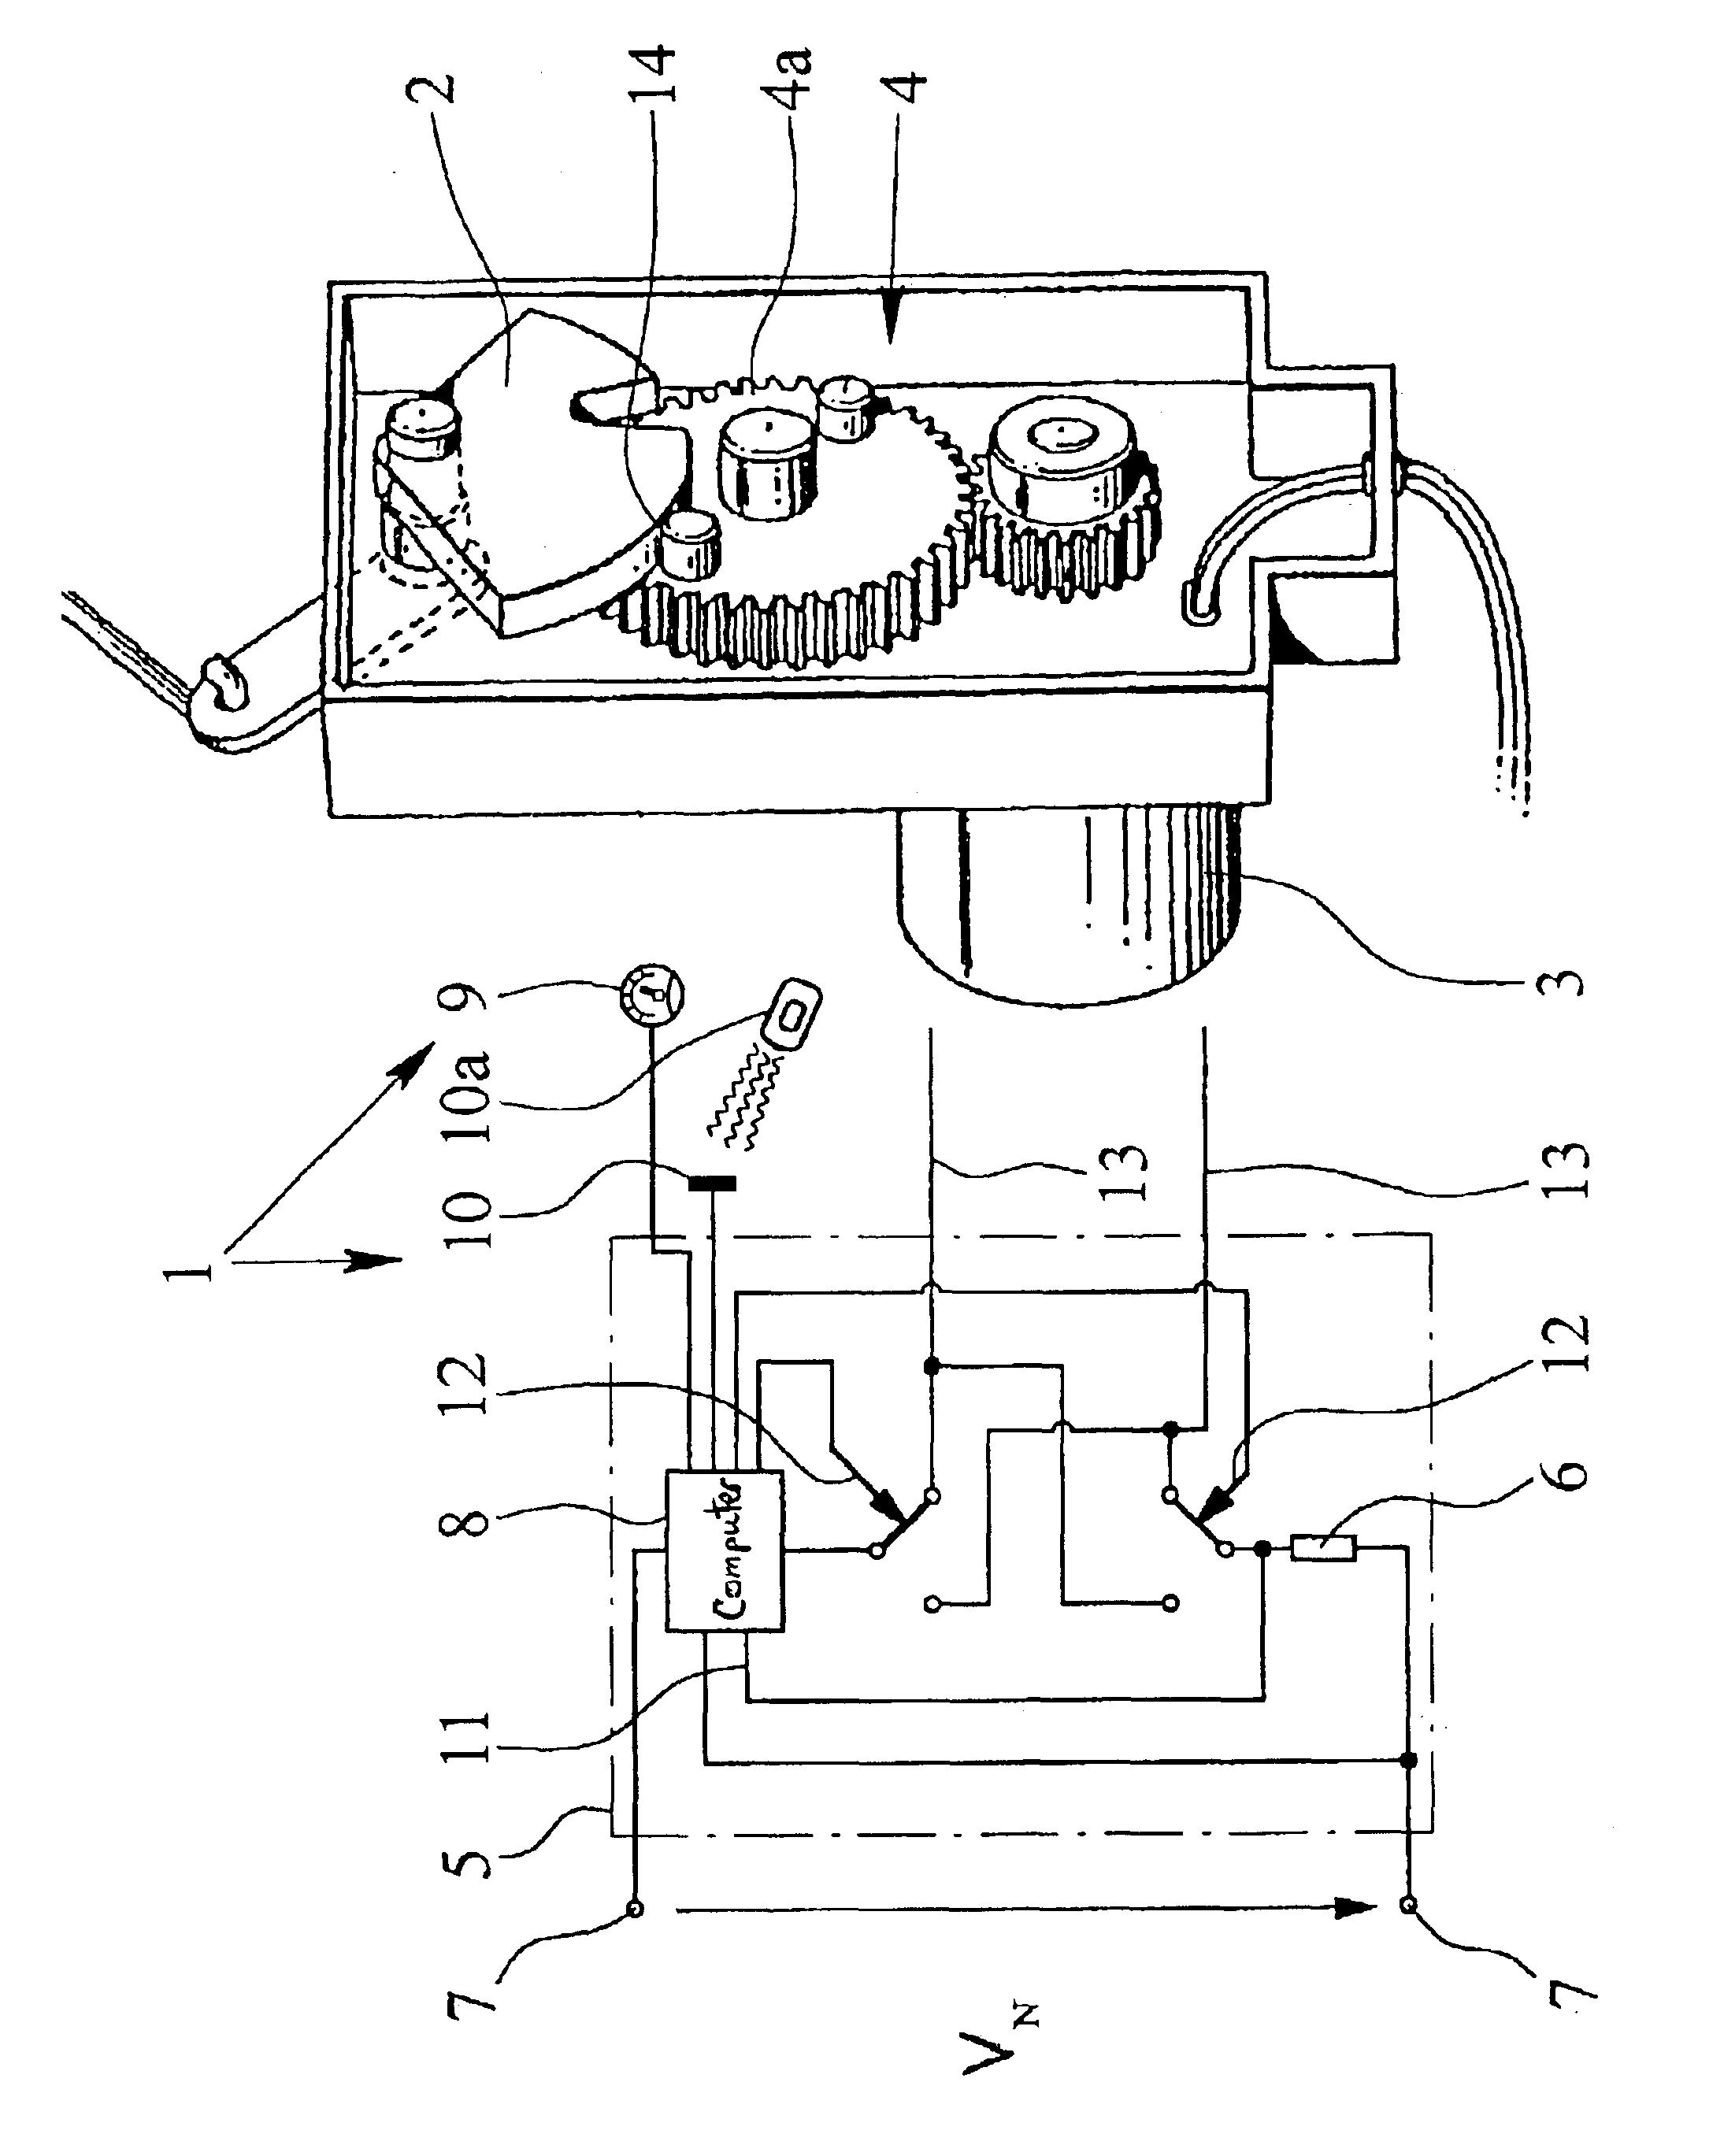 Motor vehicle door lock with an electromechanical central locking system drive